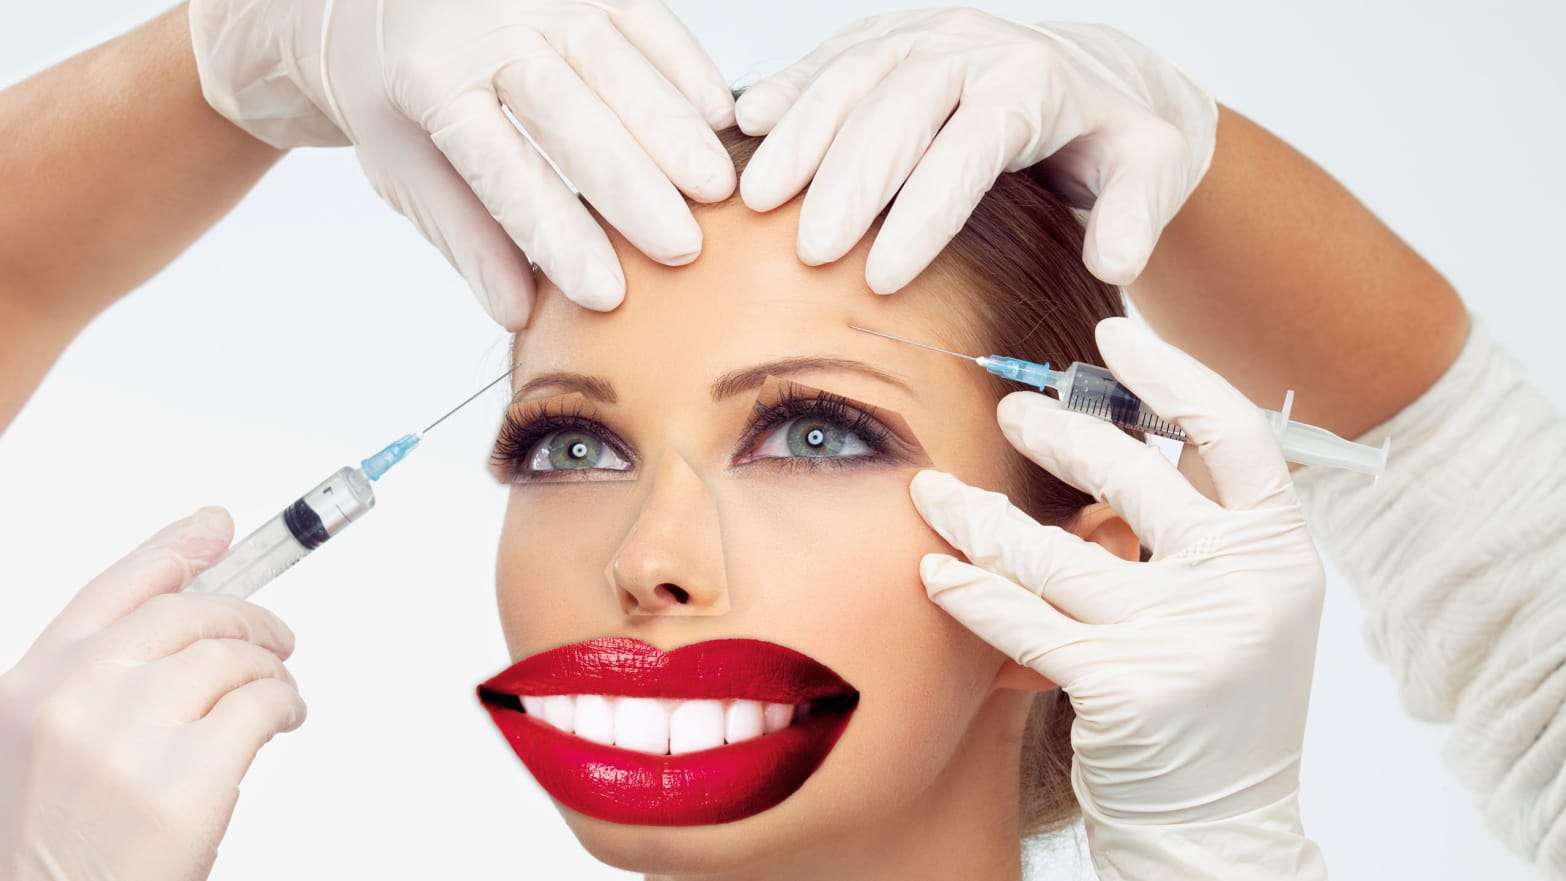 image of woman with bigger red lipstick lips and eyes and hands holding needles medscape medicine health plastic surgery surgeon happiness satisfaction burnout depression suicide celebrity boob job butt cosmetic reconstruction reconstructive money